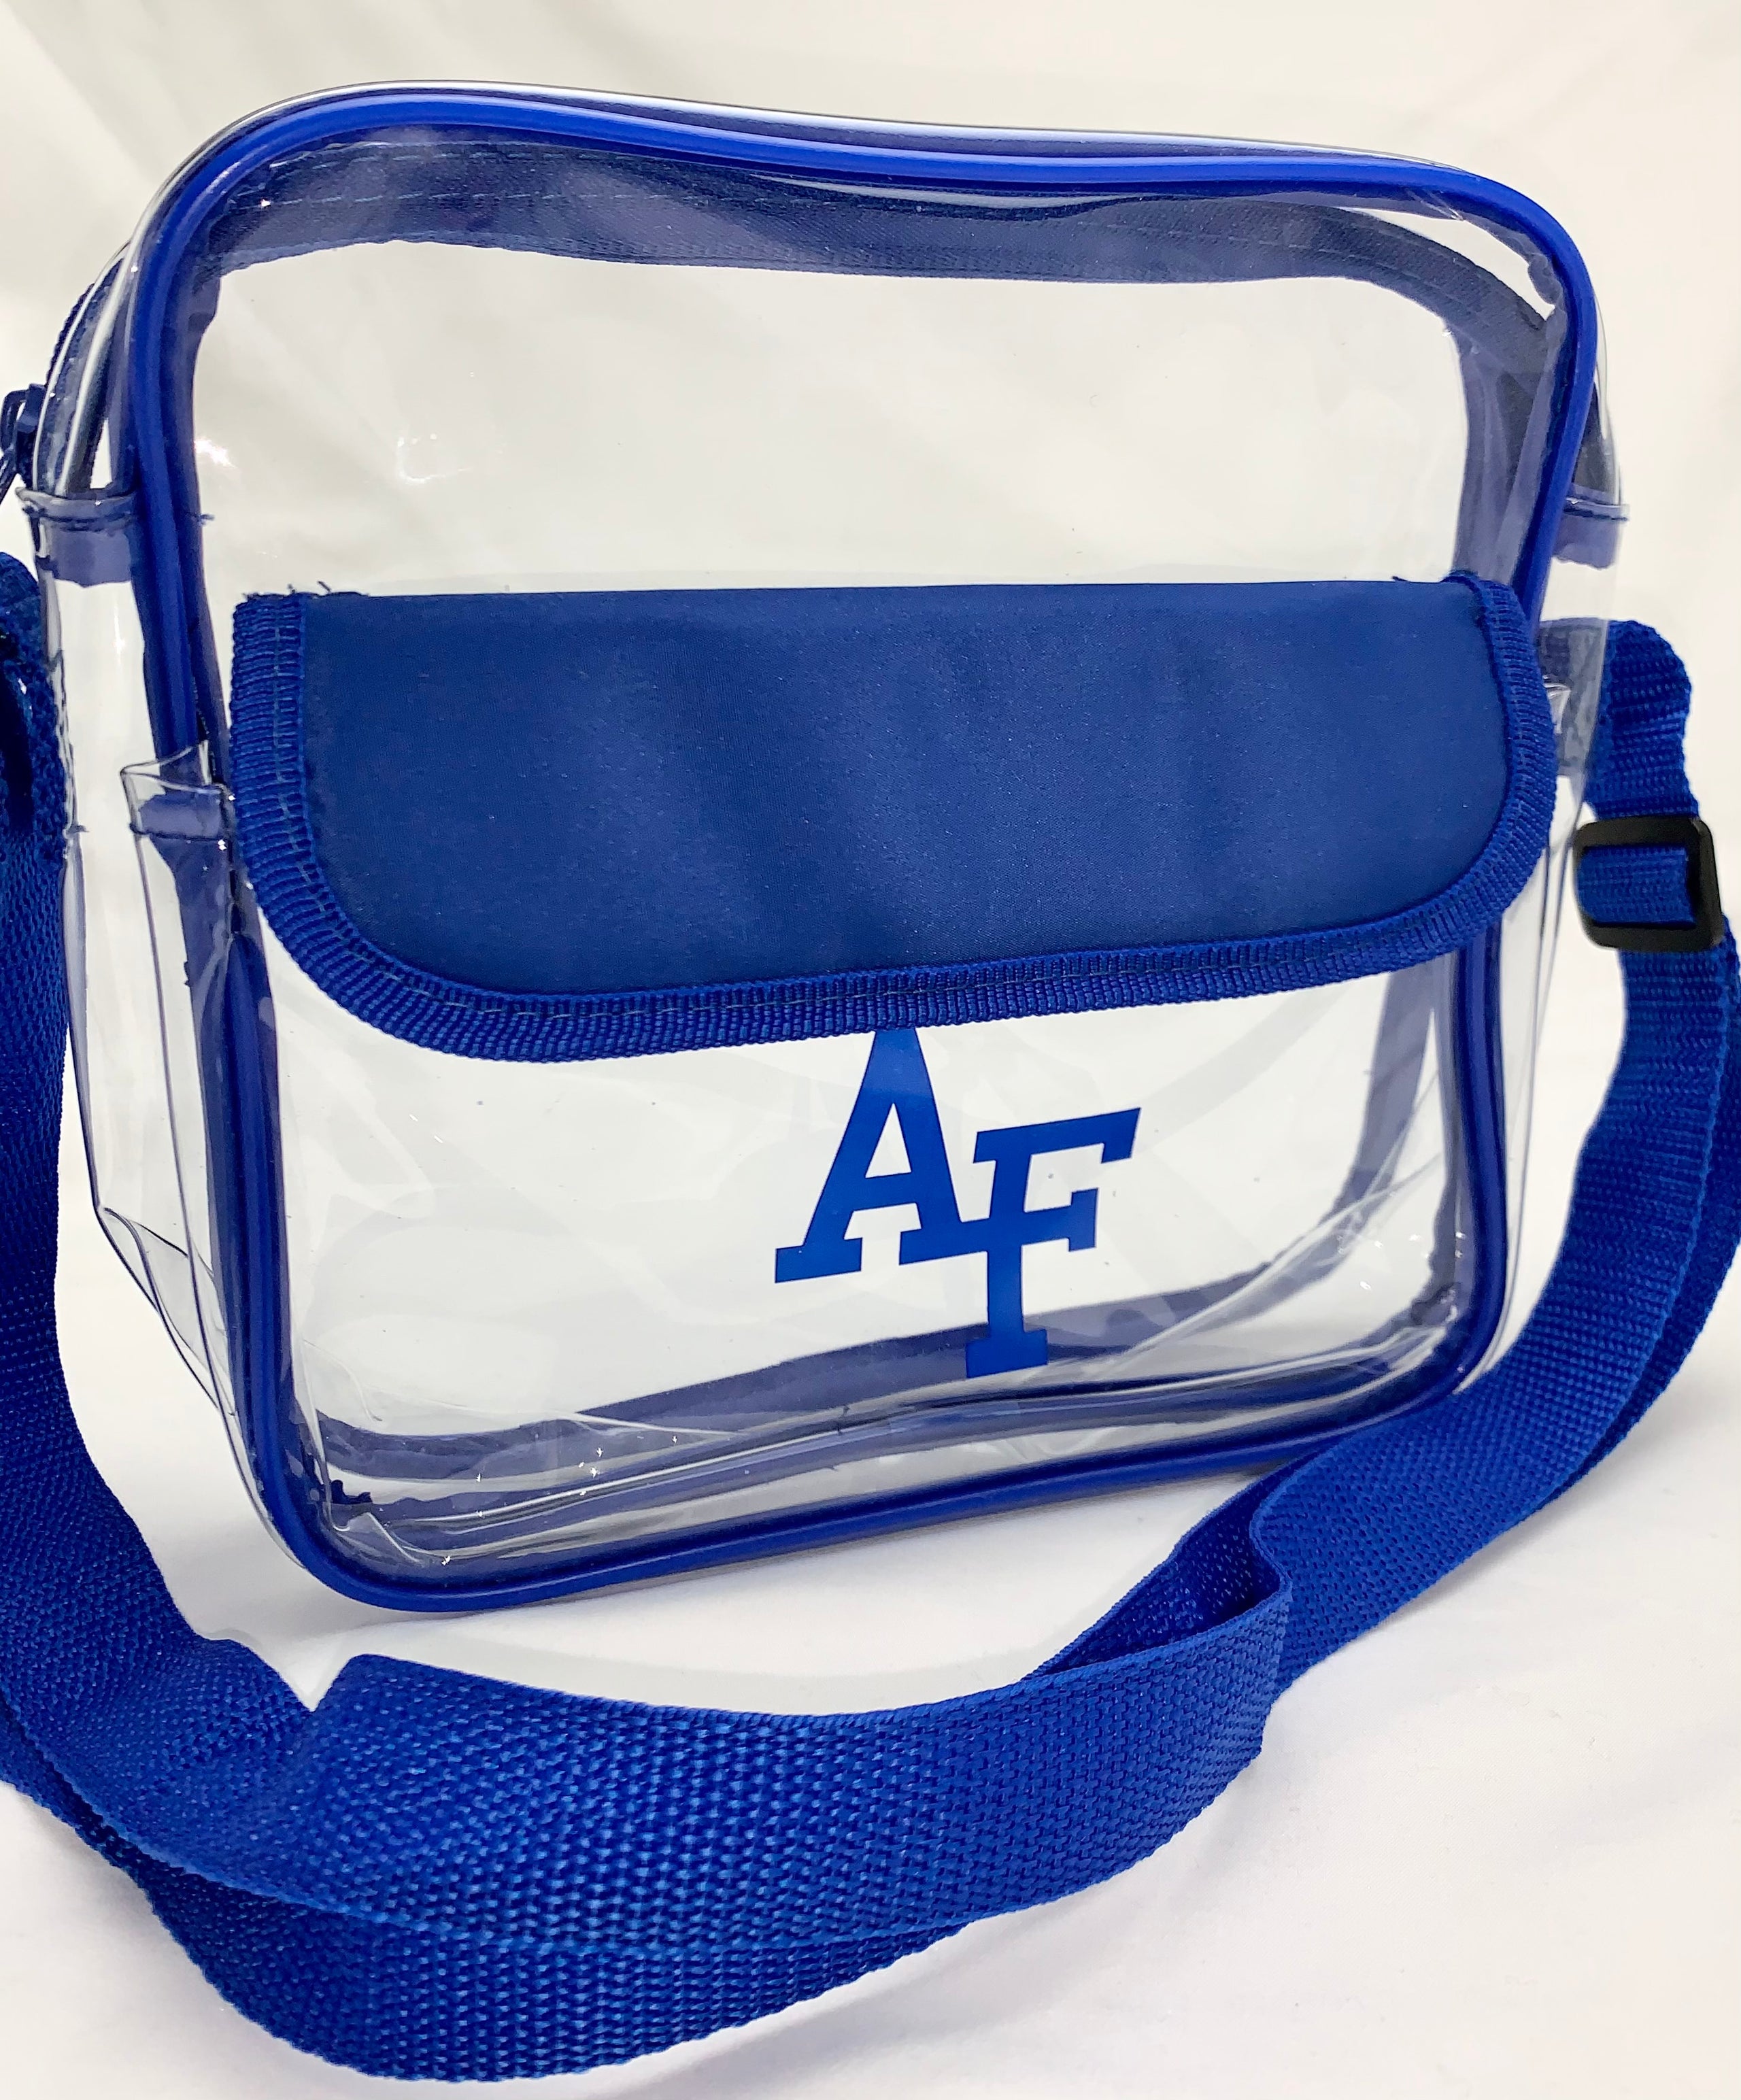 Dodgers Clear Stadium Approved Bag Stadium Approved Bag 